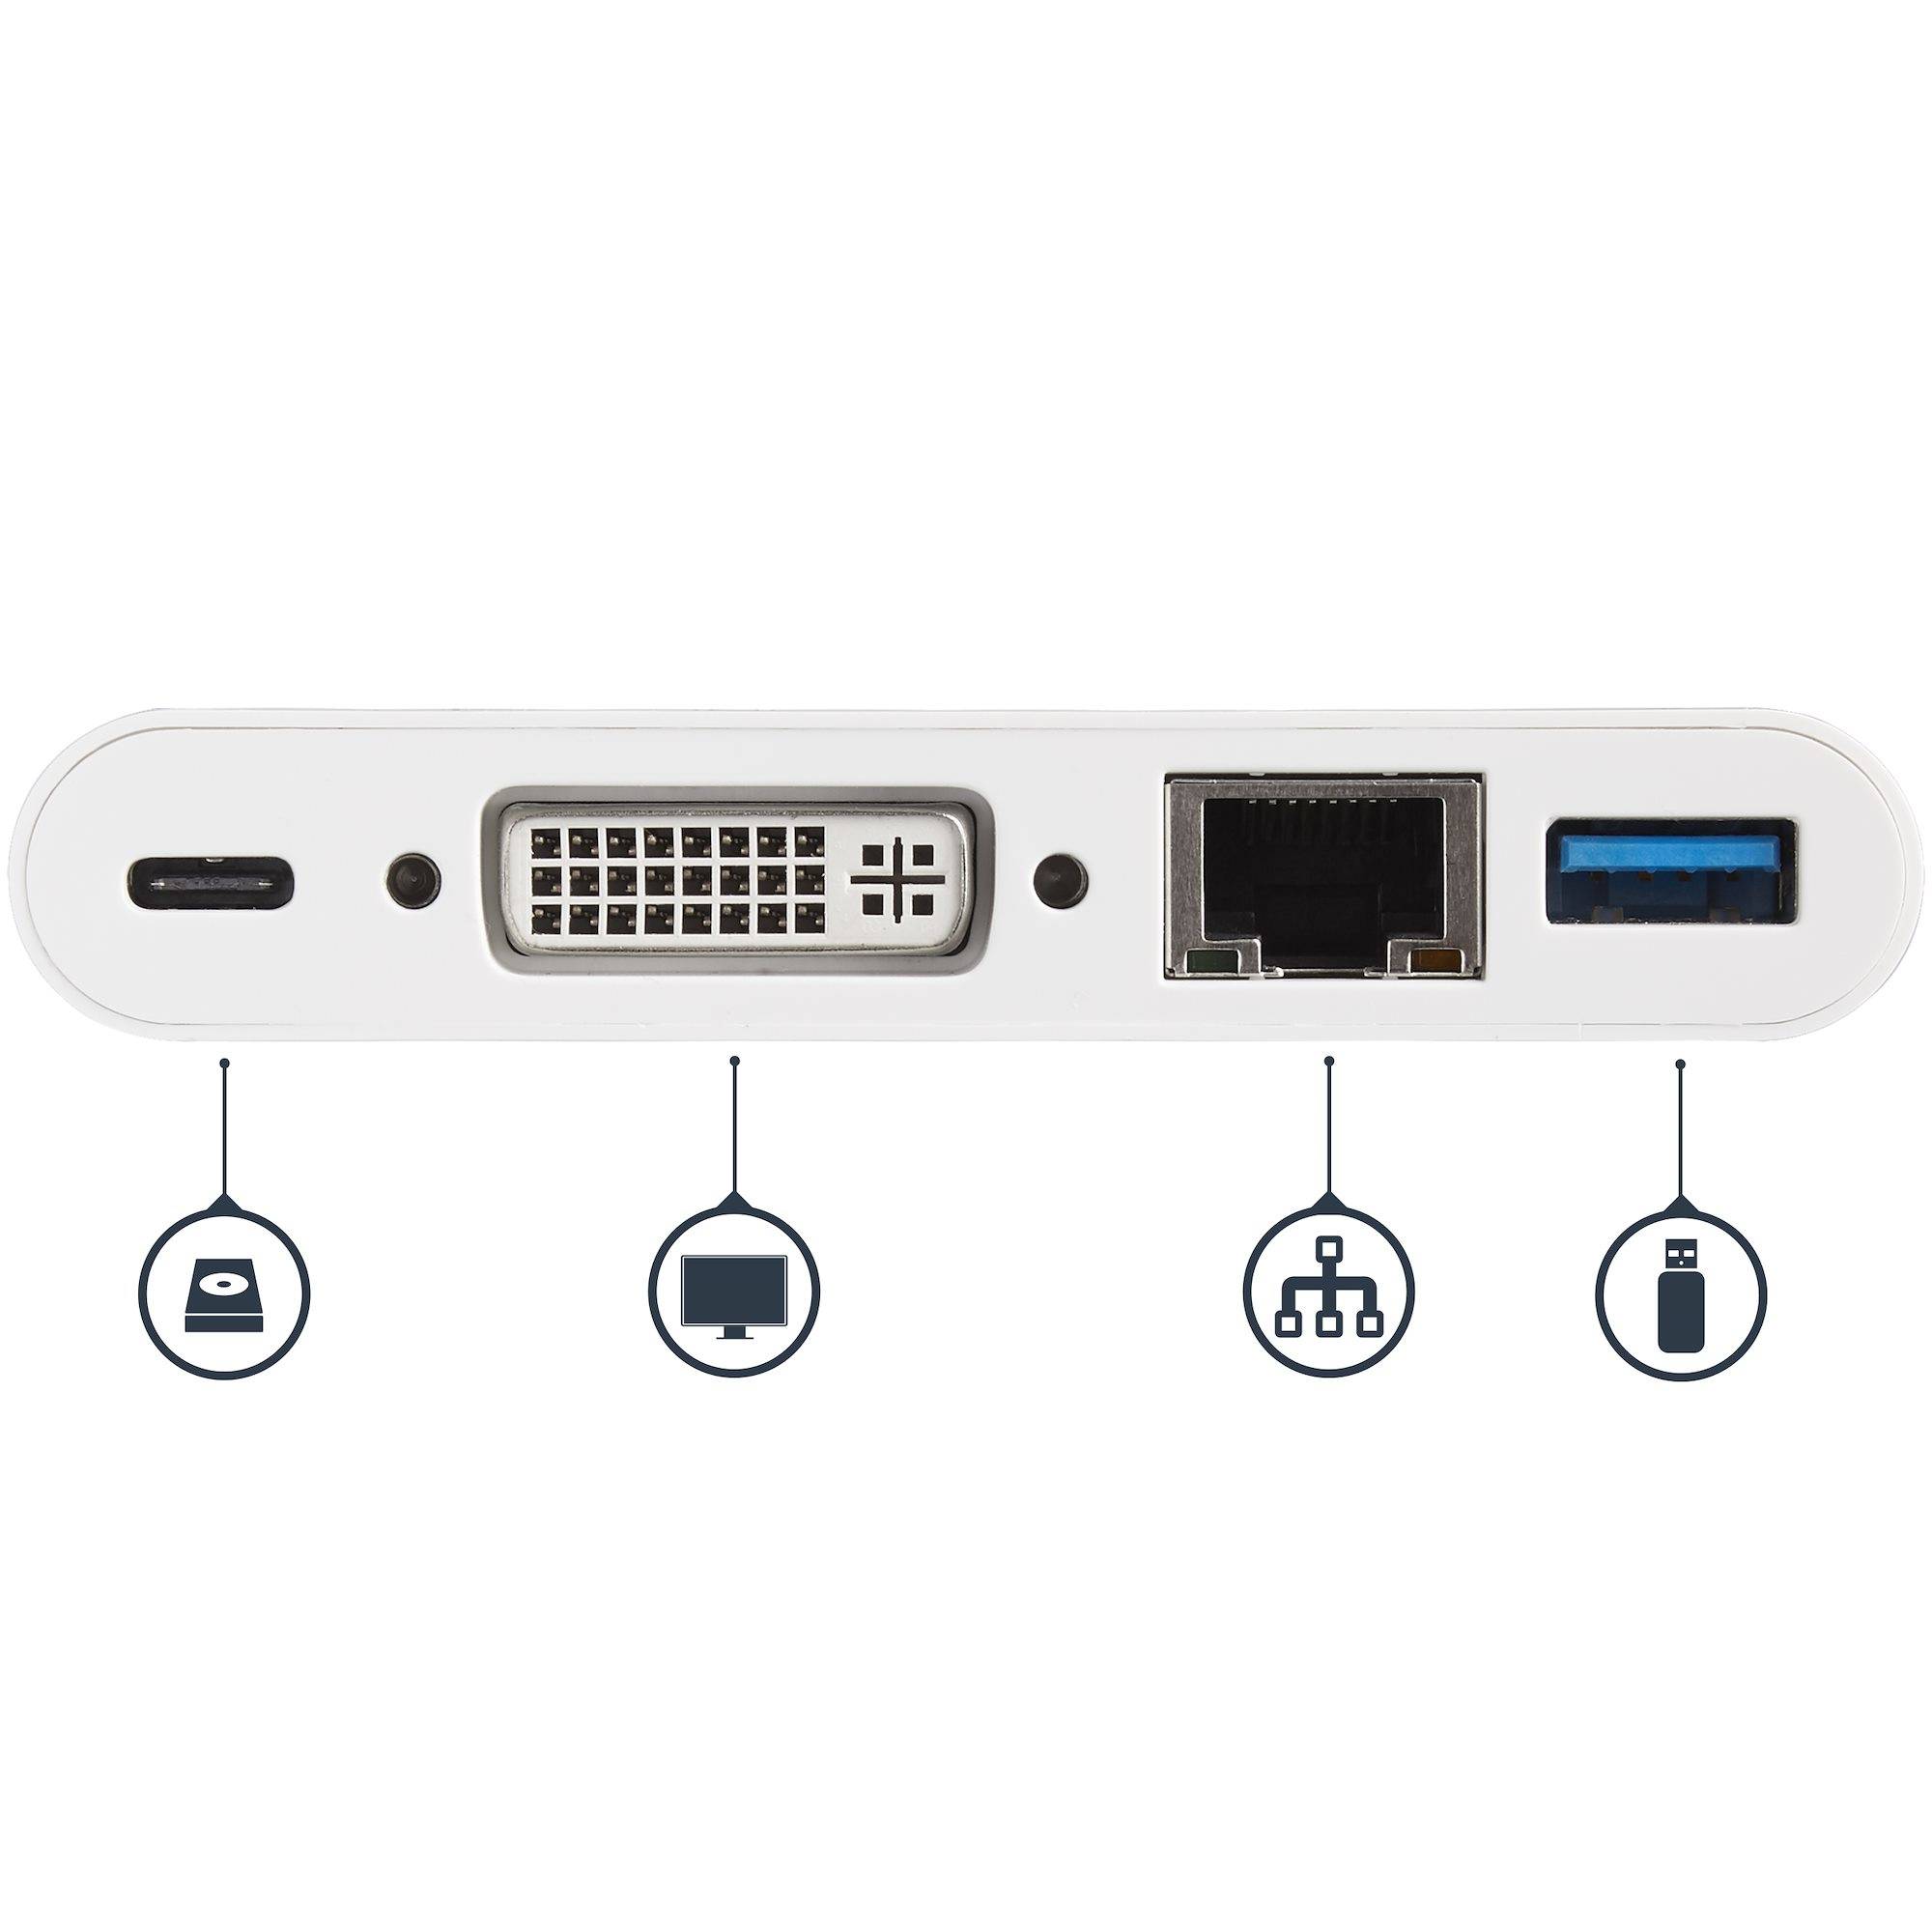 Rca Informatique - image du produit : USB-C MULTIPORT ADAPTER - WITH POWER DELIVERY DVI GBE - USB 3